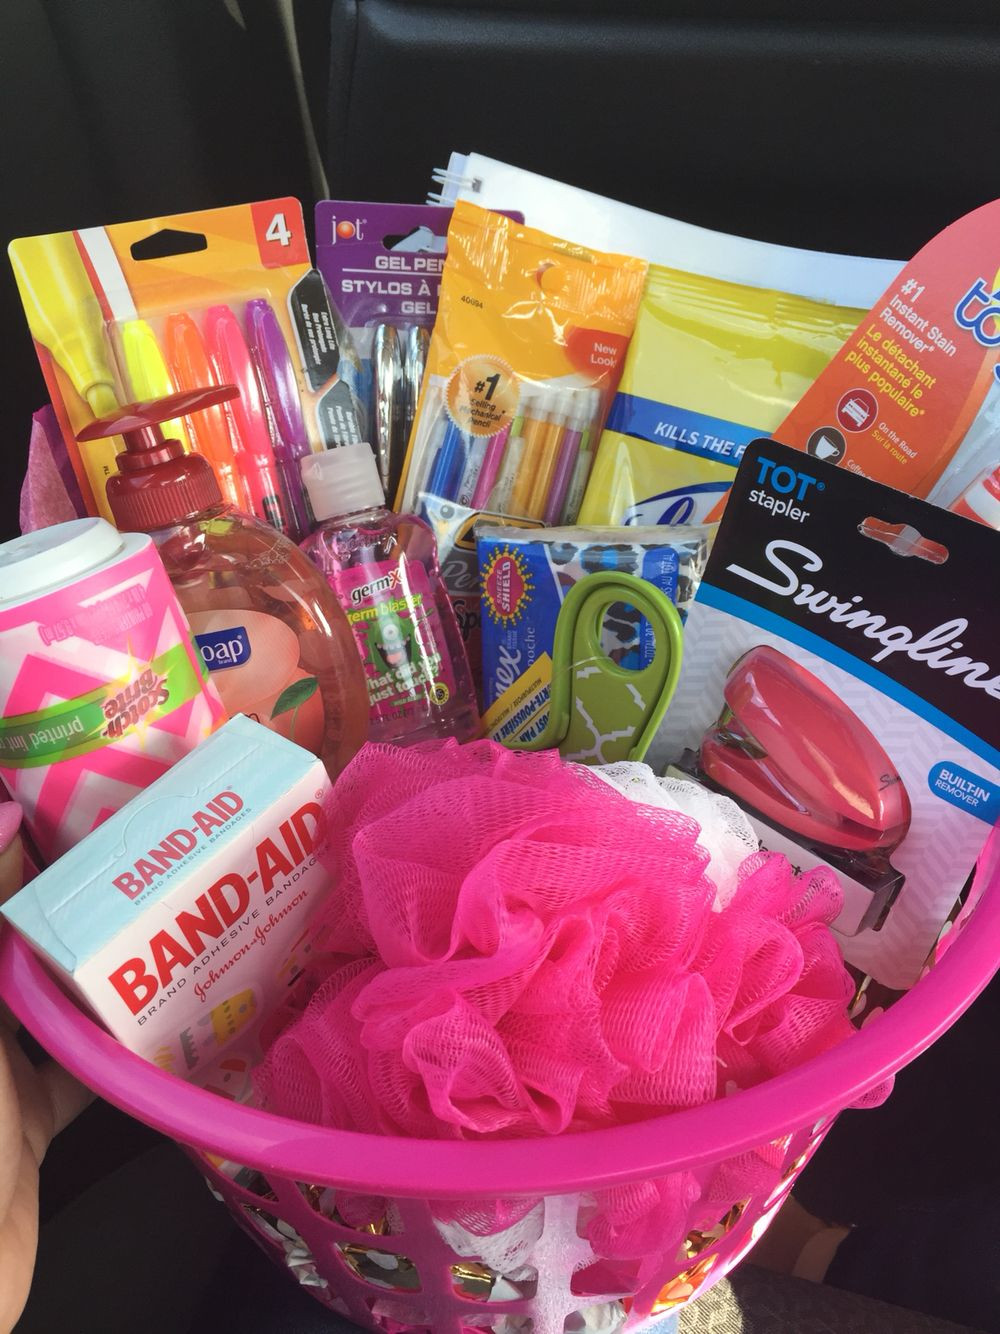 Going To College Gift Basket Ideas
 Made my friend a going away basket for college with all